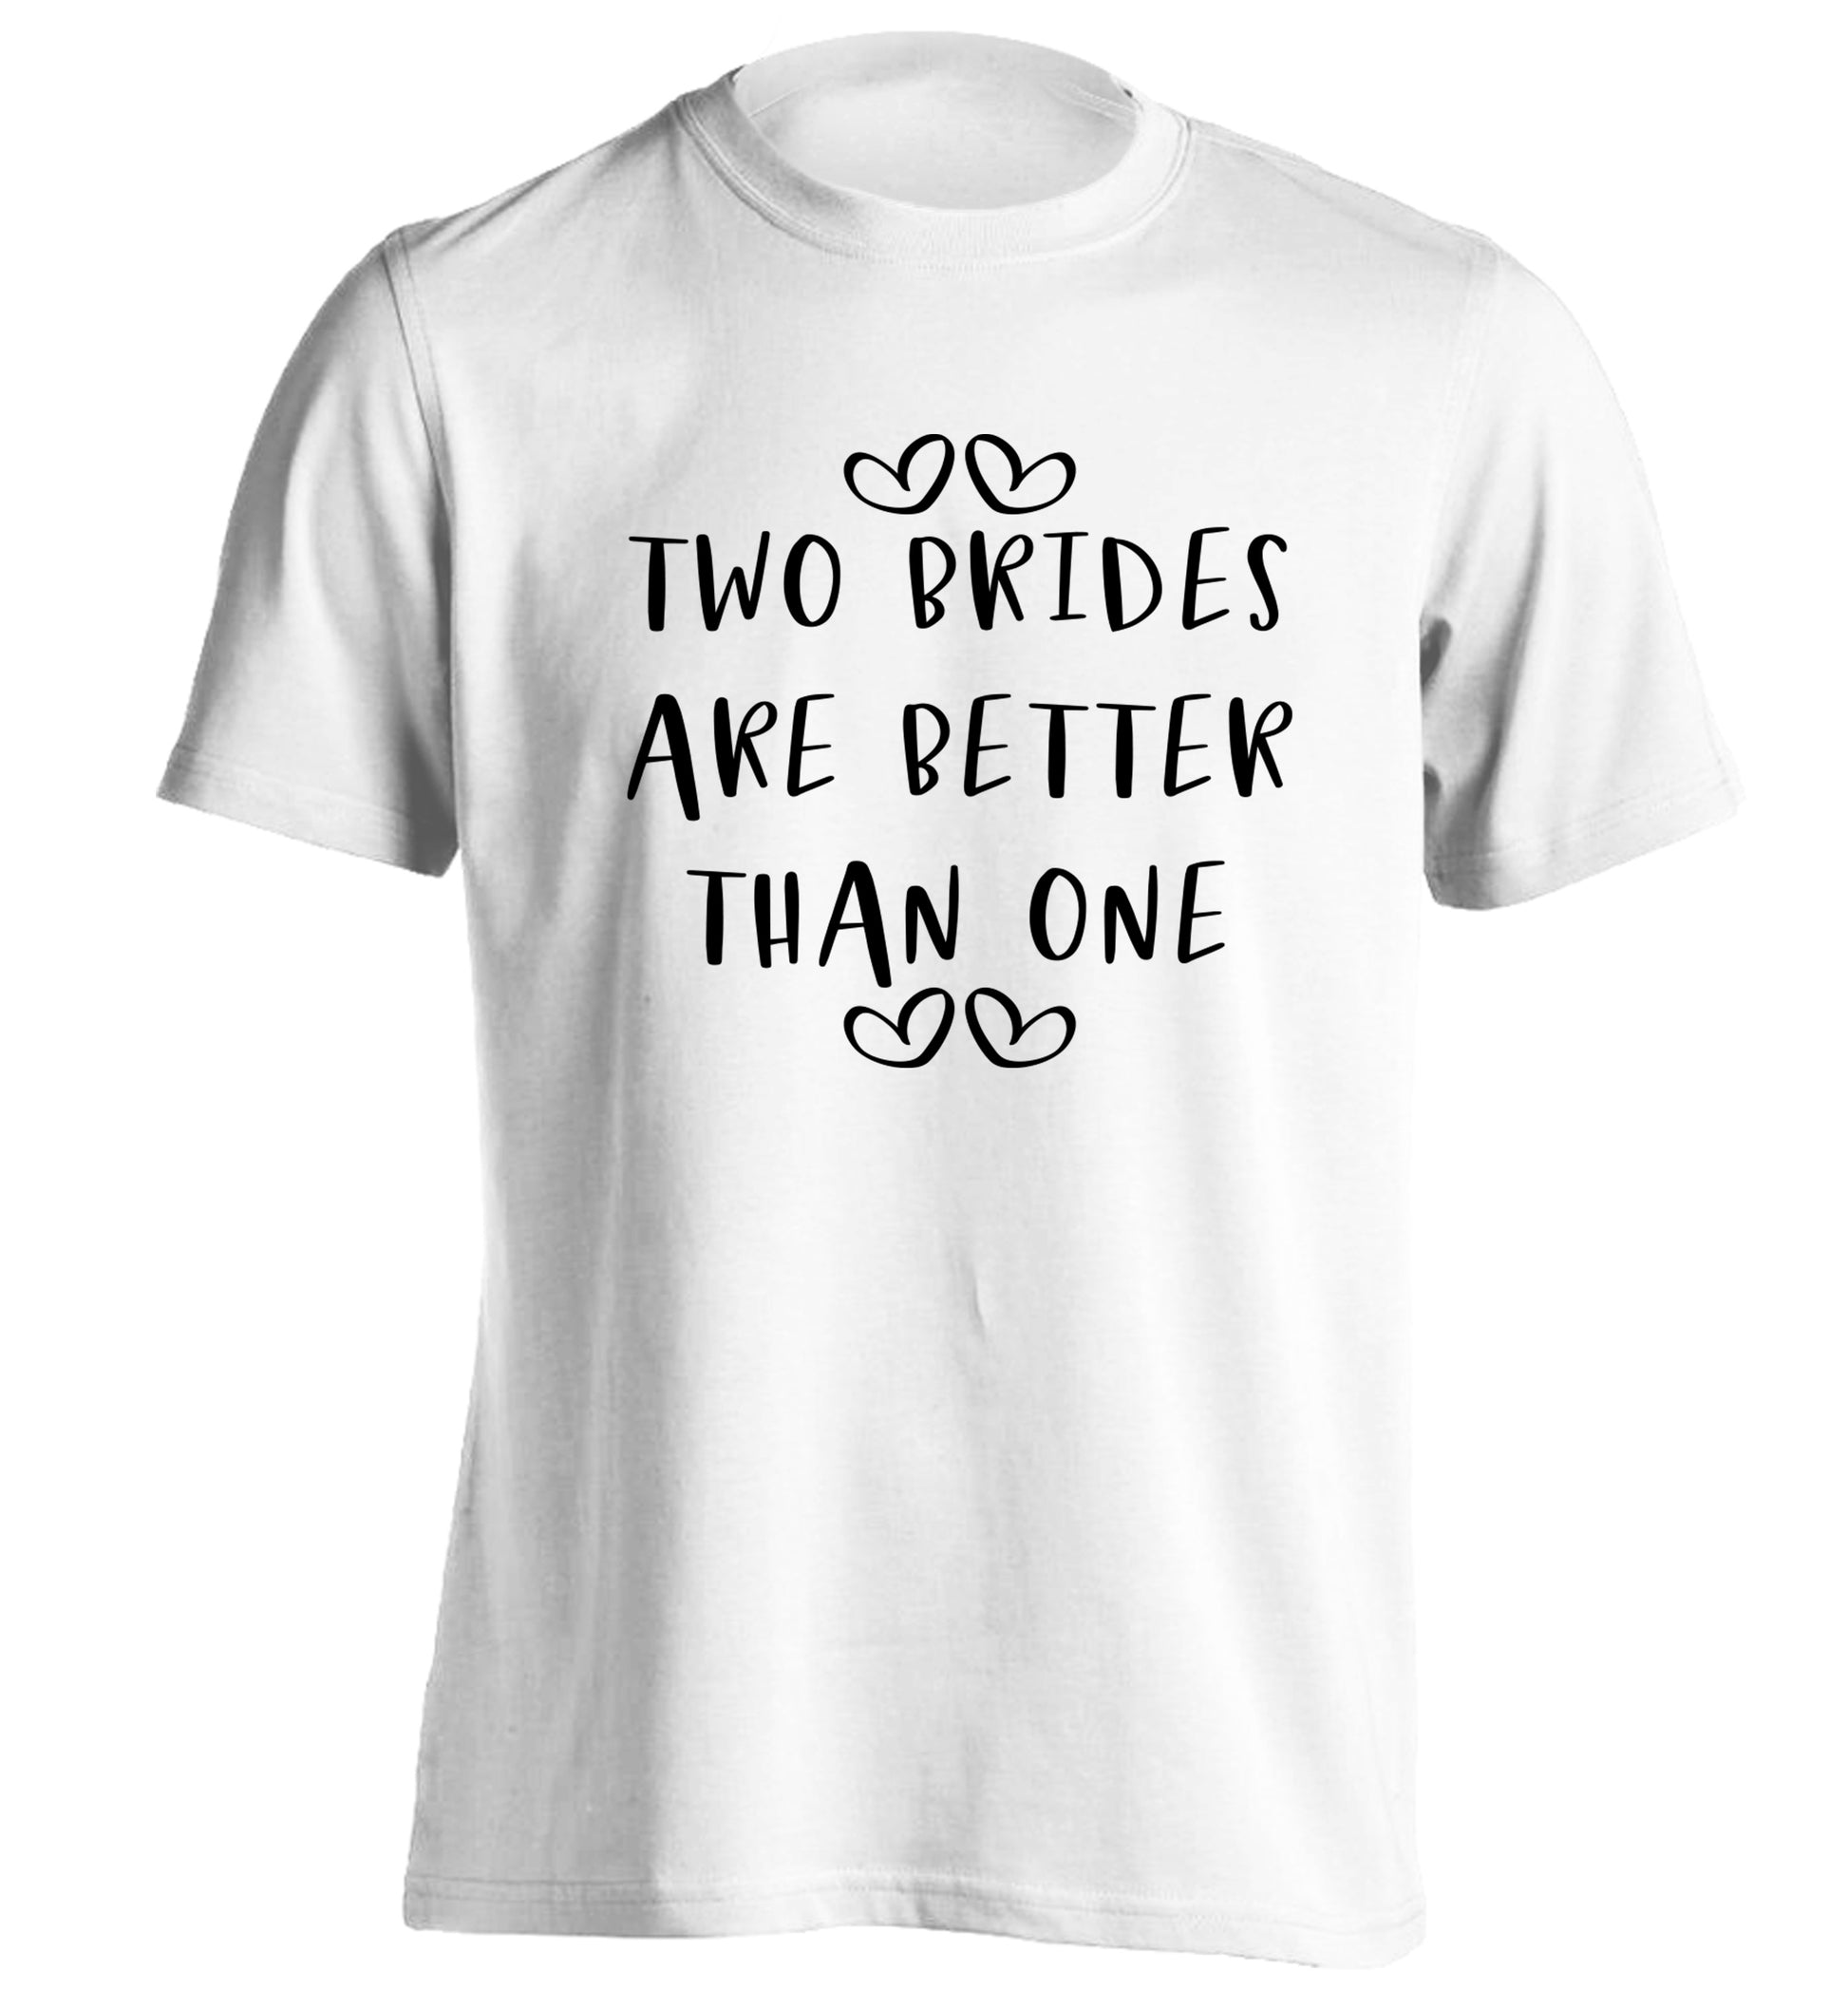 Two brides are better than one adults unisex white Tshirt 2XL